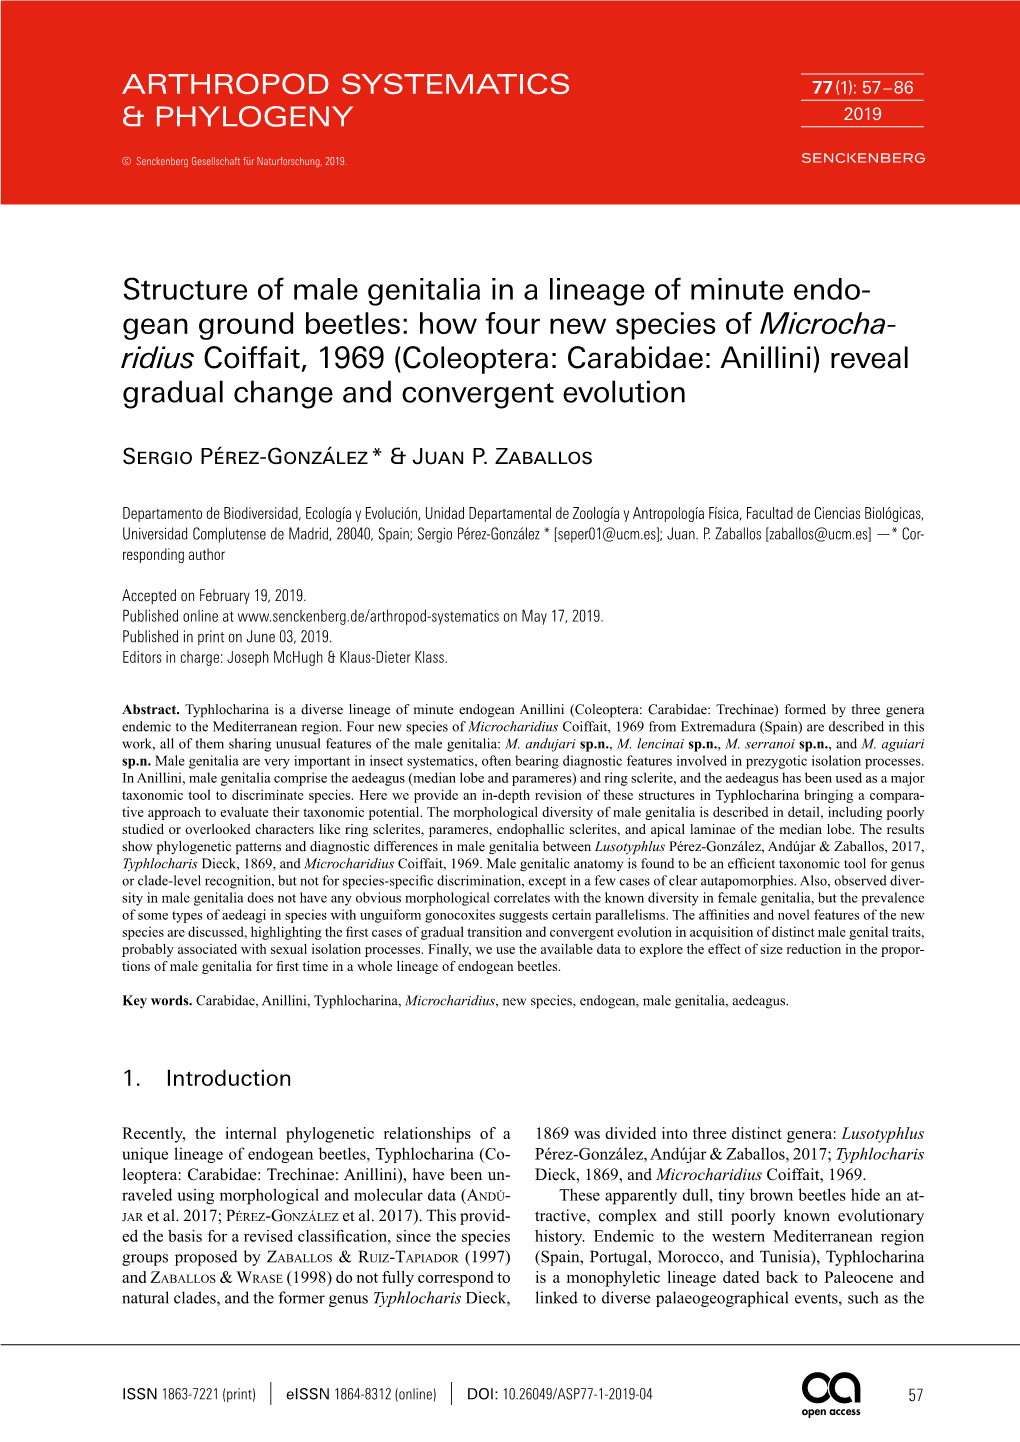 Structure of Male Genitalia in a Lineage of Minute Endogean Ground Beetles